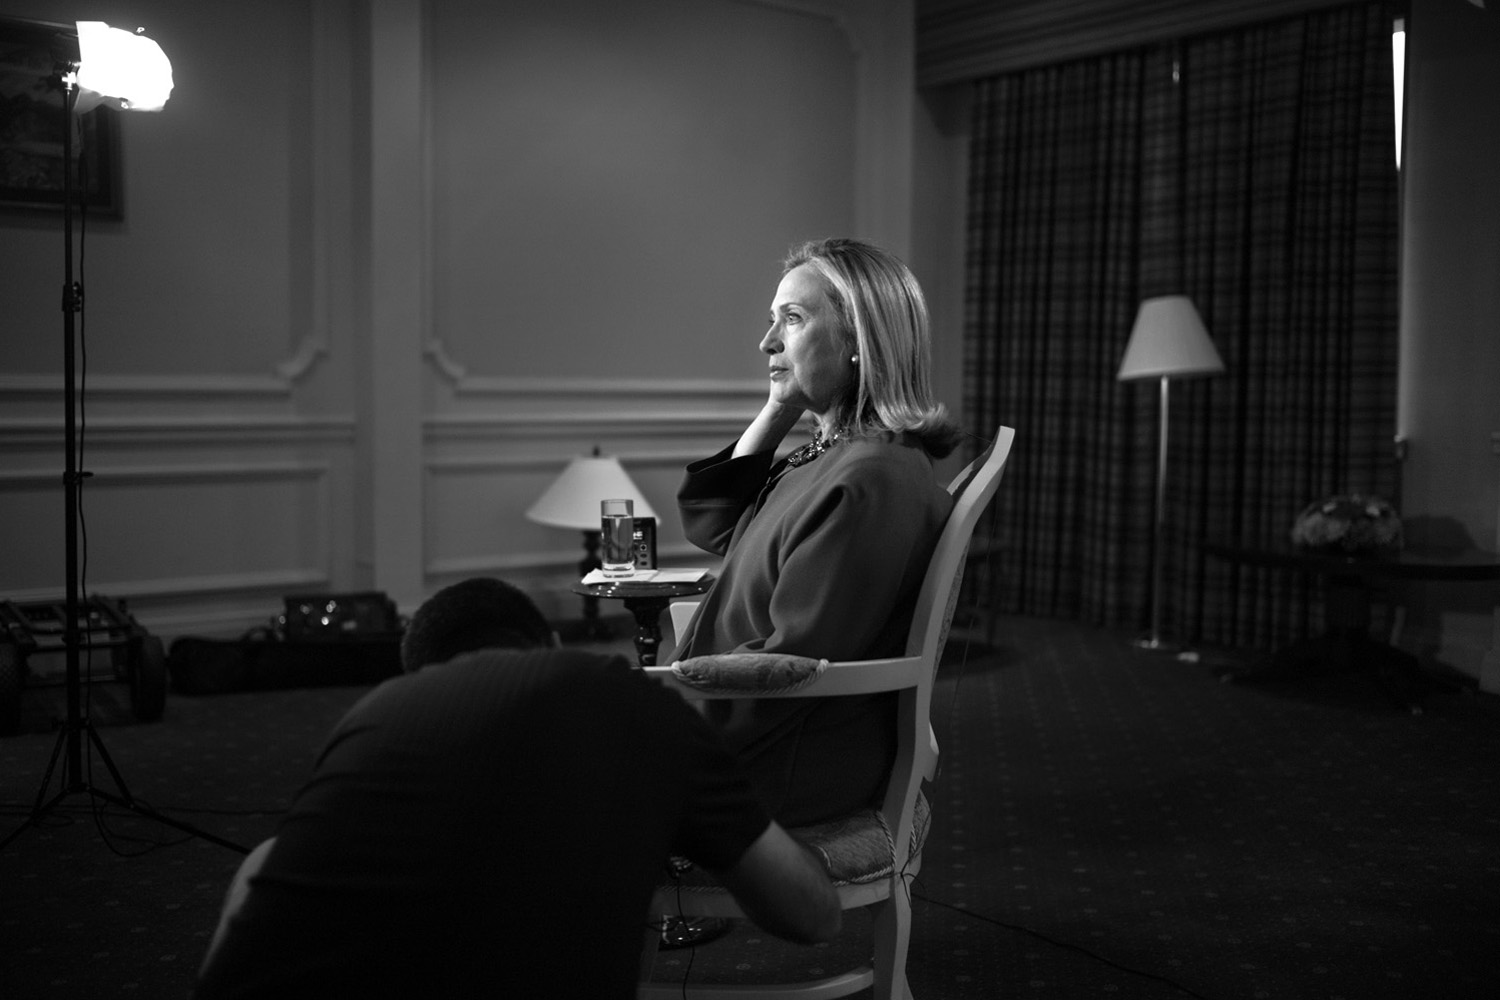 Diana Walker. From  Hillary Clinton; the Rise of Smart Power . November 7, 2011 issue (cover story).
                              
                              Clinton recording interviews for American Sunday morning television shows in Tashkent, Uzbekistan, on October 23, 2011.